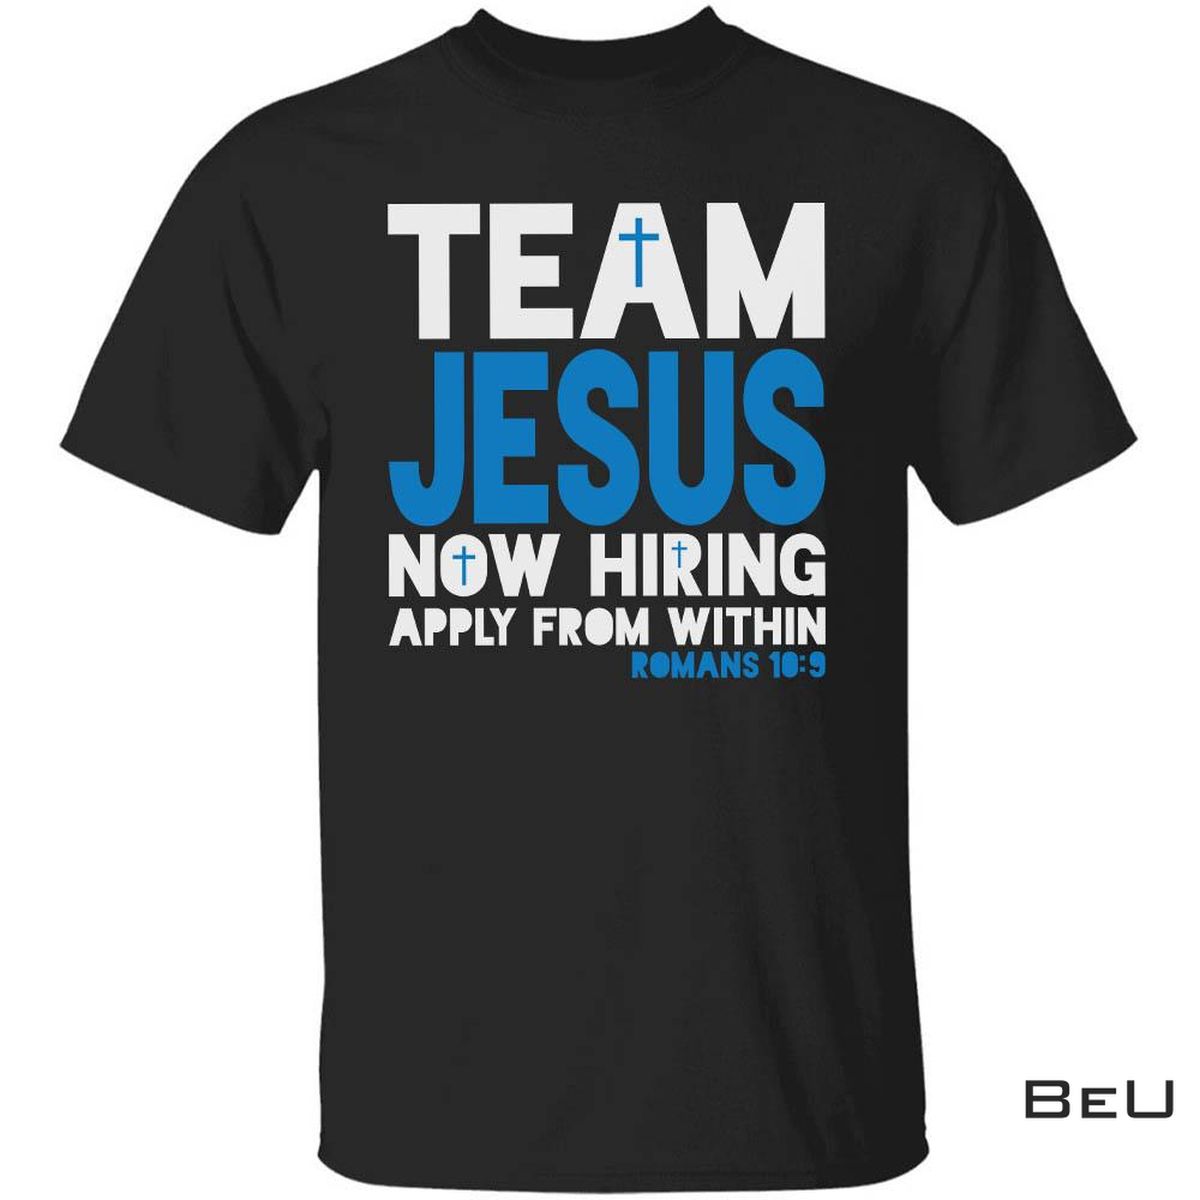 Team Jesus Now Hiring Apply From Within Romans 10:9 Shirt